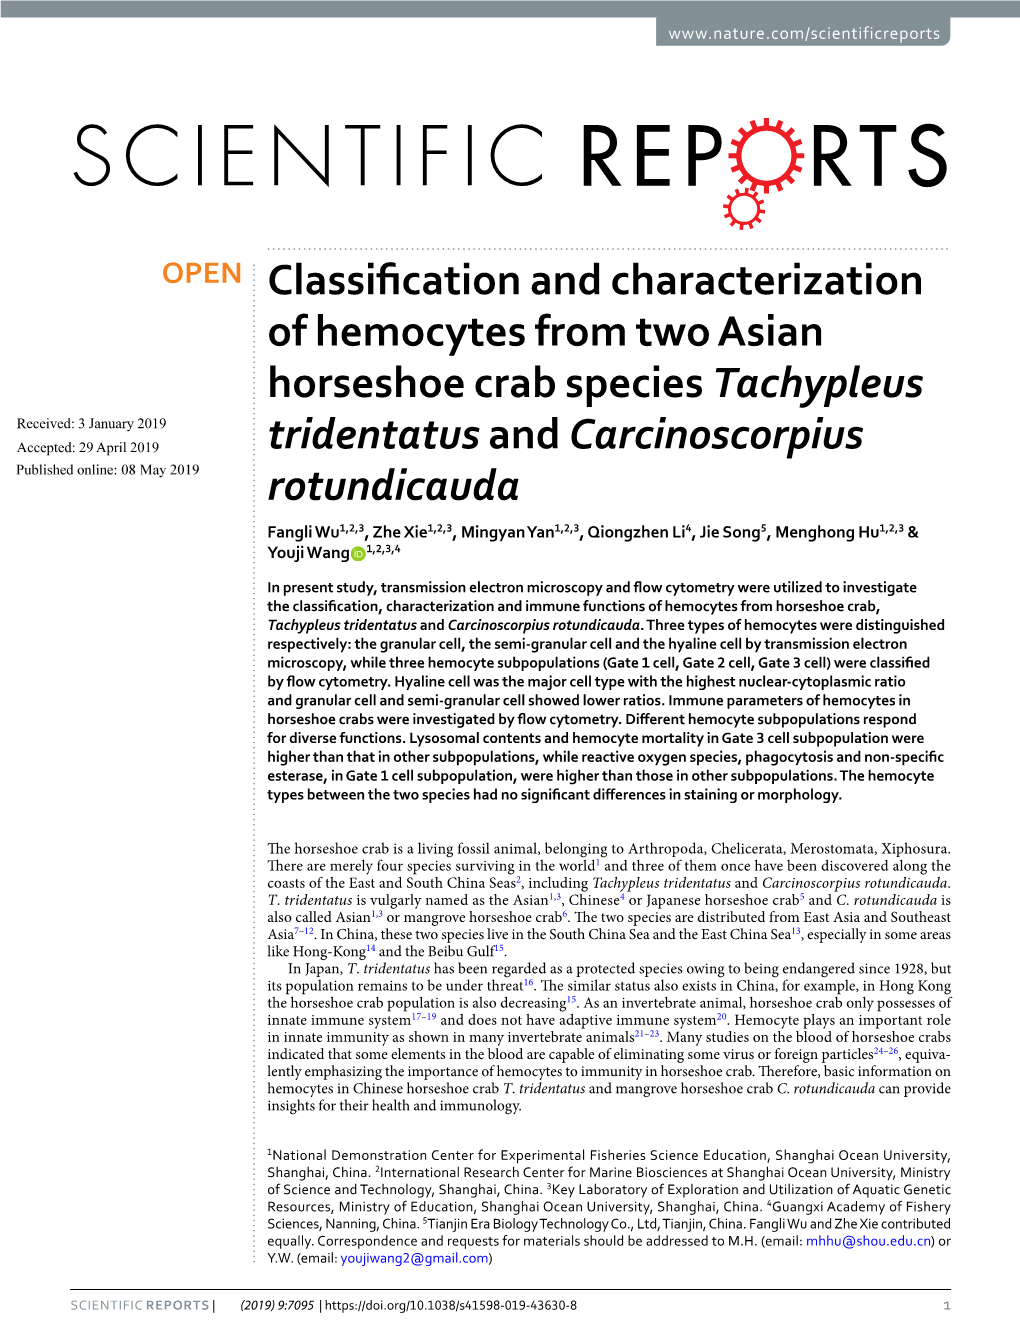 Classification and Characterization of Hemocytes from Two Asian Horseshoe Crab Species Tachypleus Tridentatus and Carcinoscorpiu